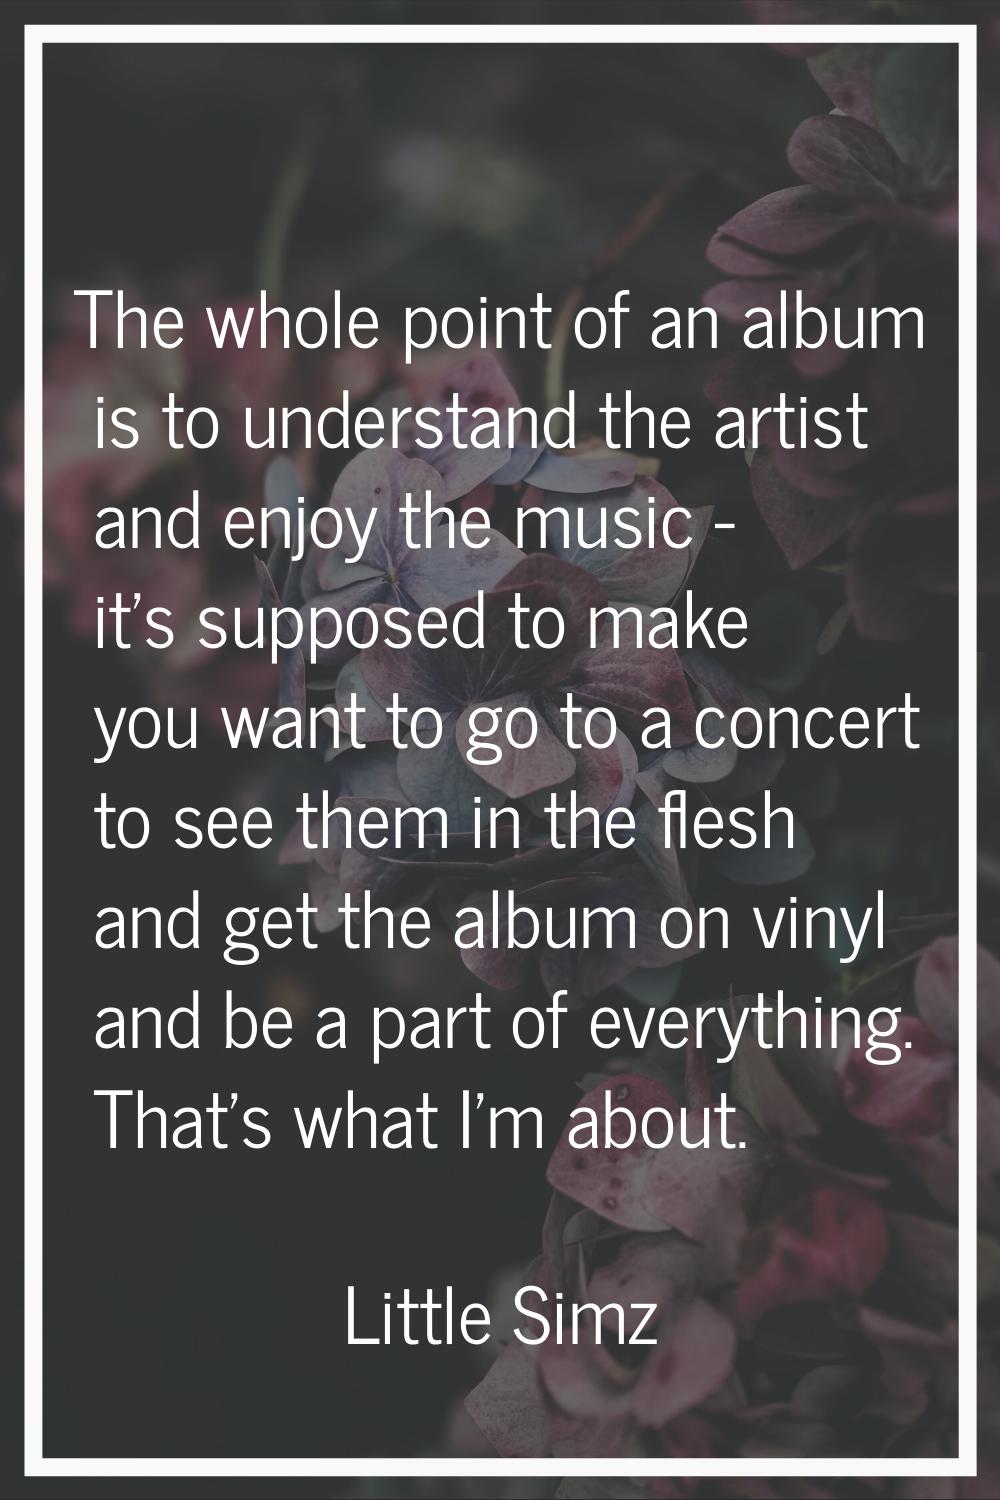 The whole point of an album is to understand the artist and enjoy the music - it's supposed to make